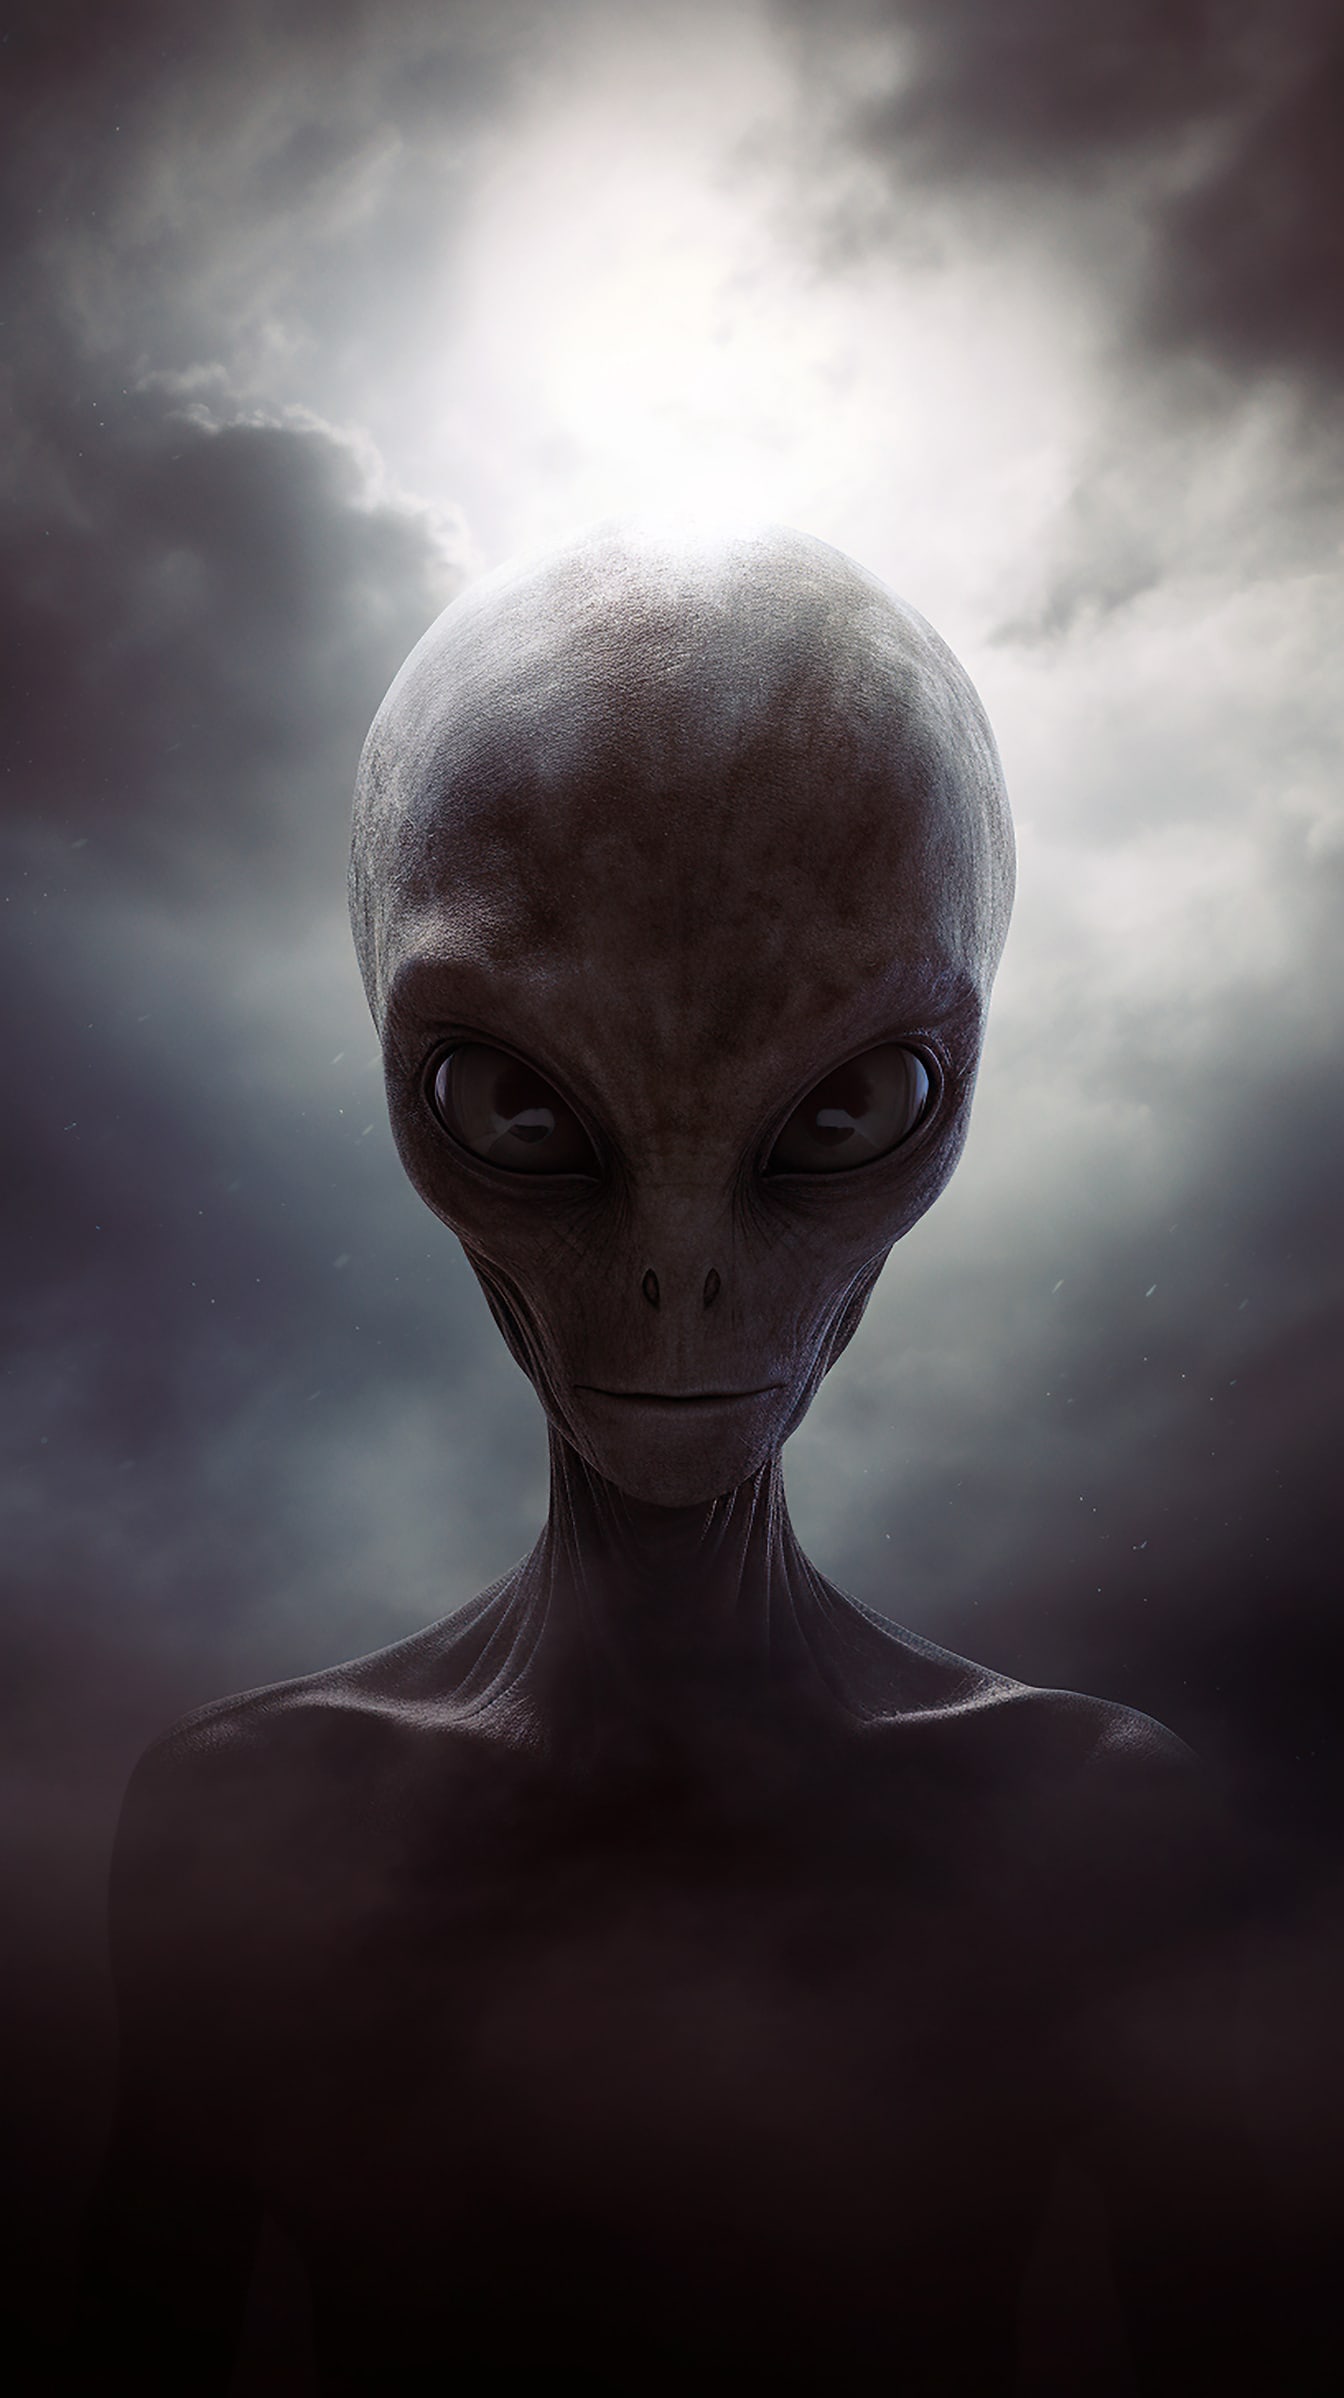 Humanoid alien creature portrait with grey skin and eyes